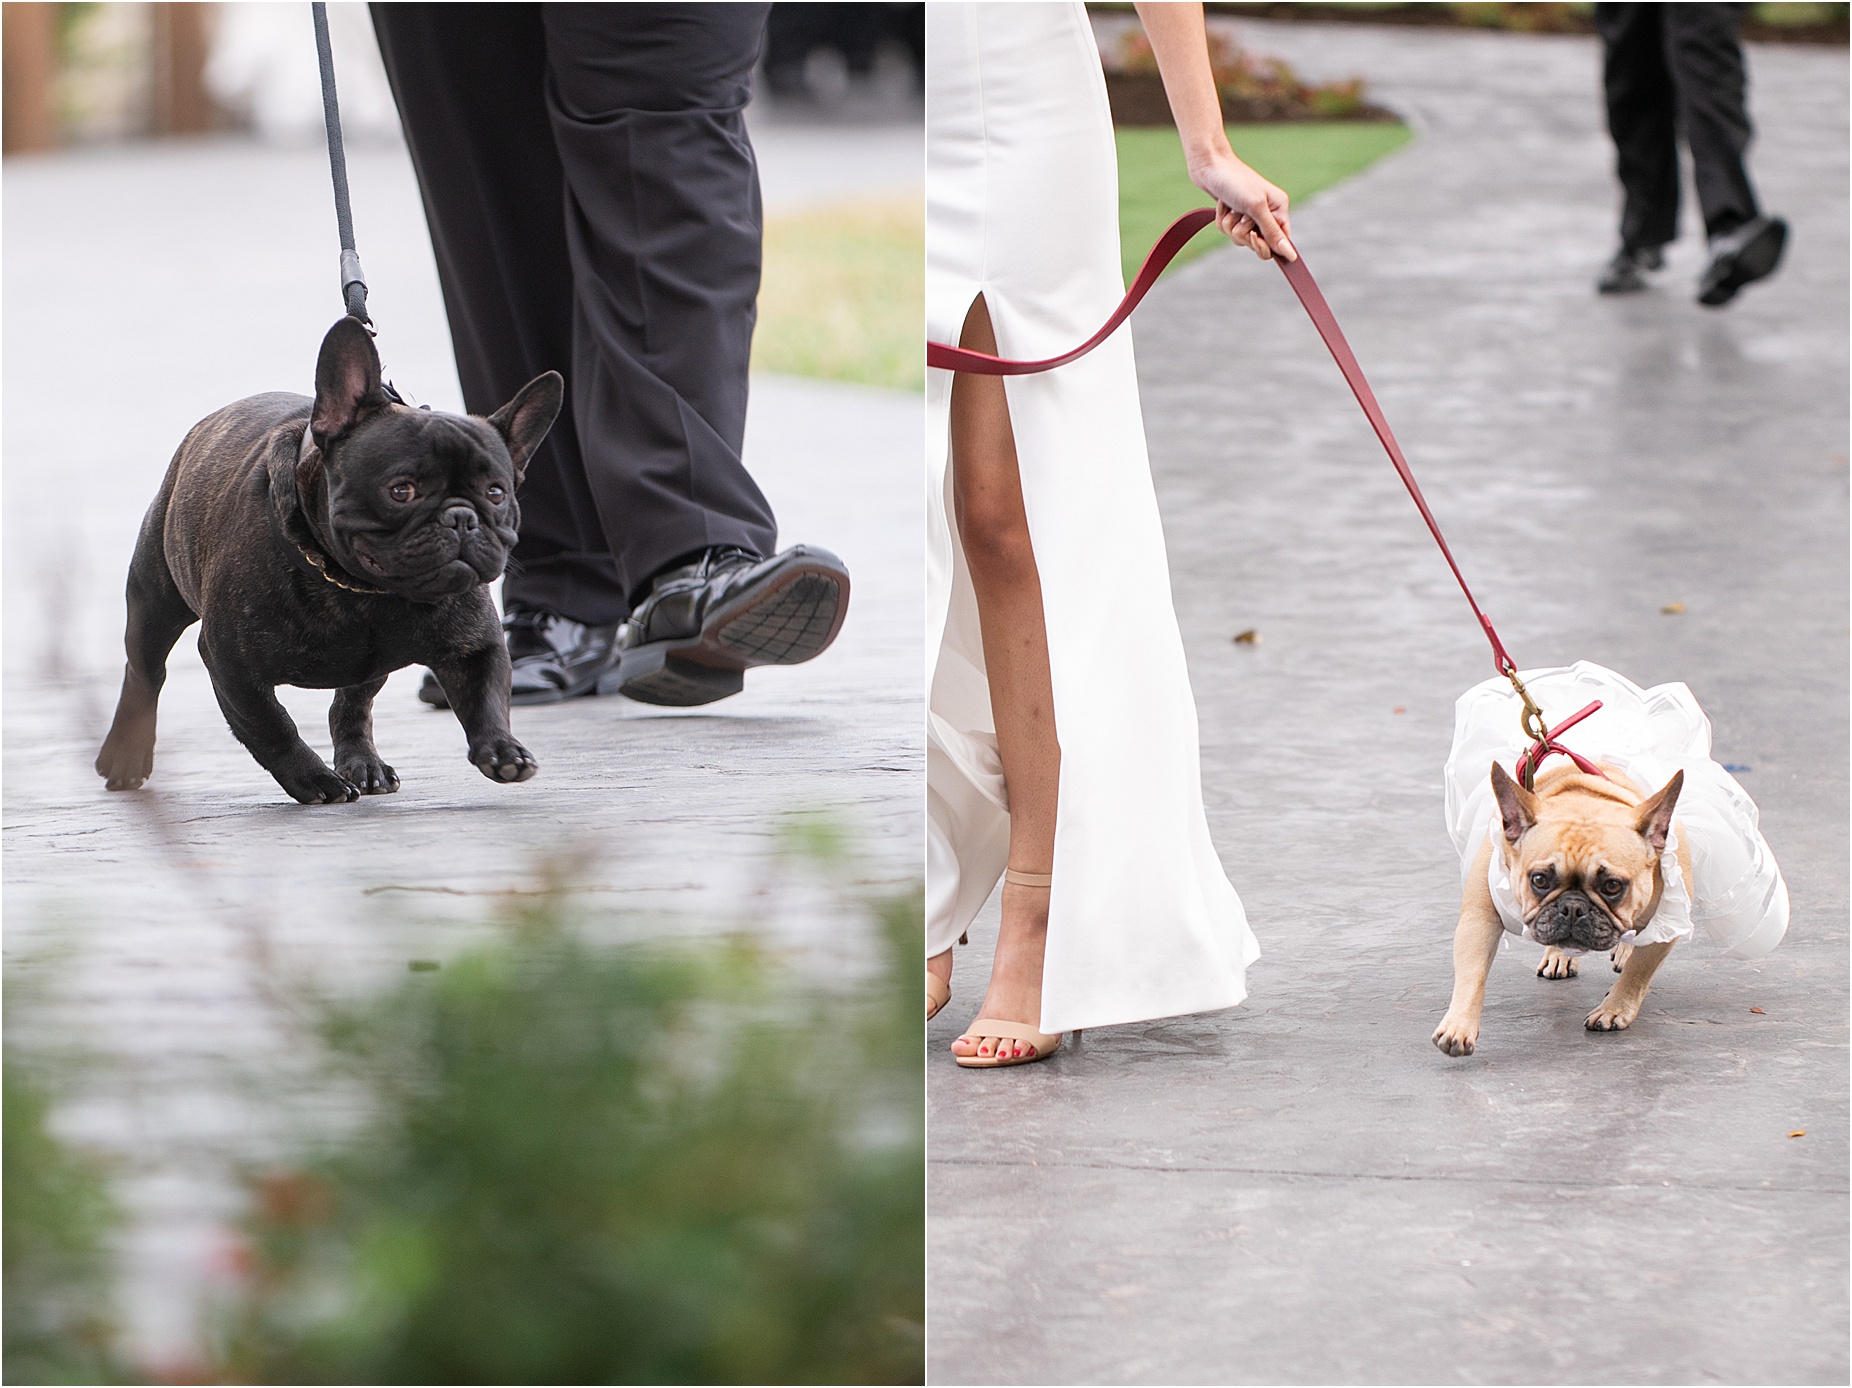 Weddings with dogs in the ceremony